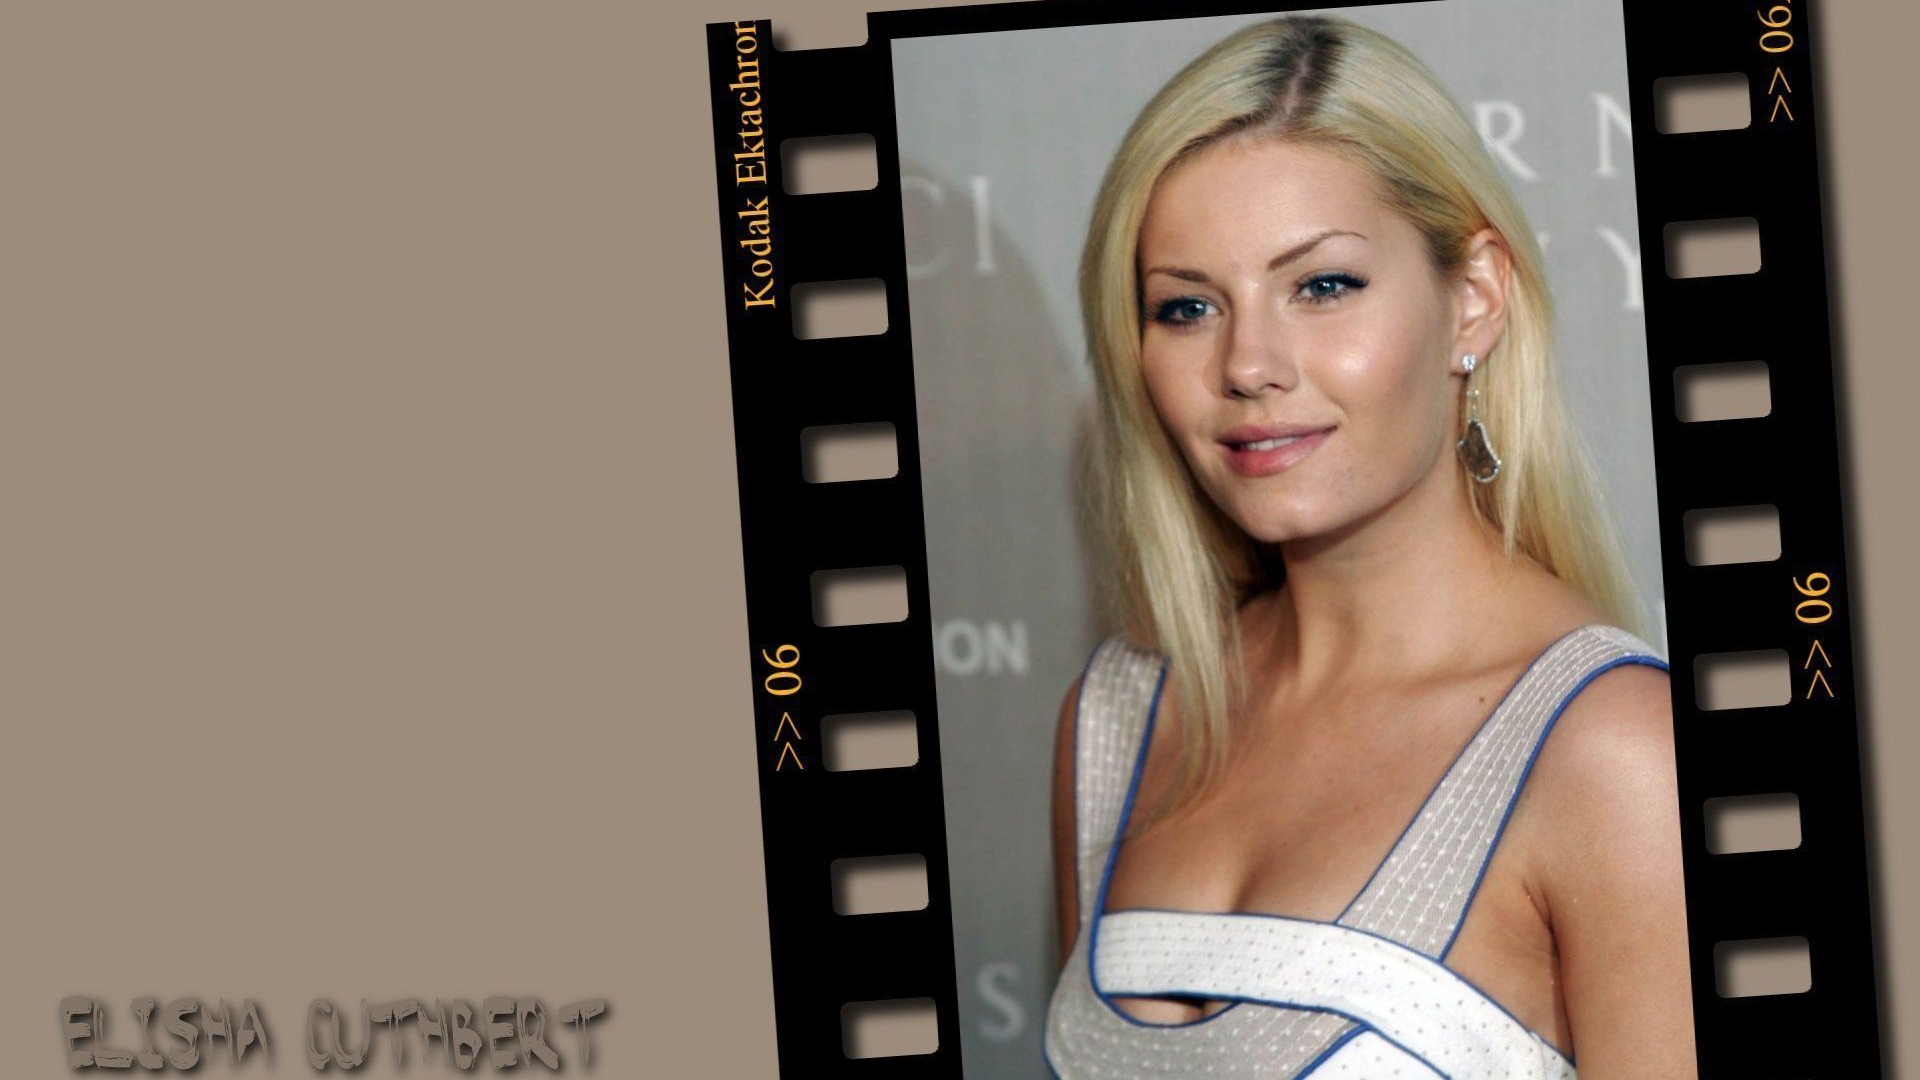 Elisha Cuthbert #011 - 1920x1080 Wallpapers Pictures Photos Images